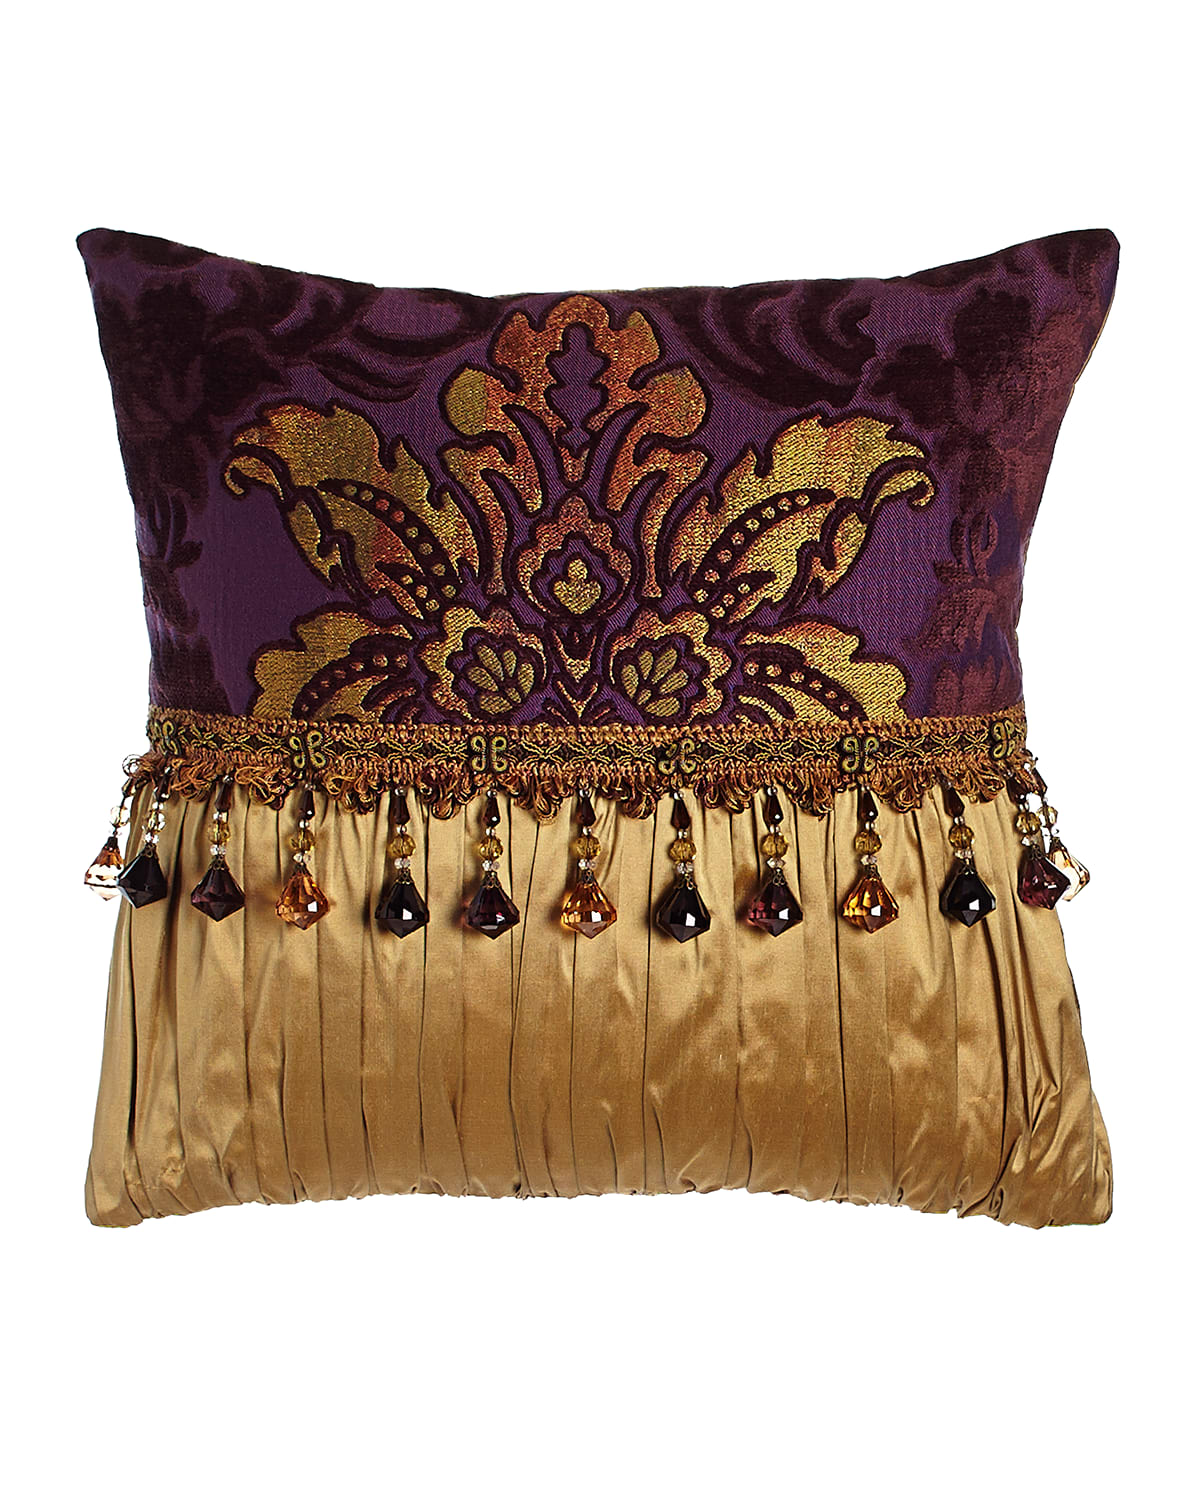 Image Dian Austin Couture Home Royal Court Pieced Pillow, 17"Sq.